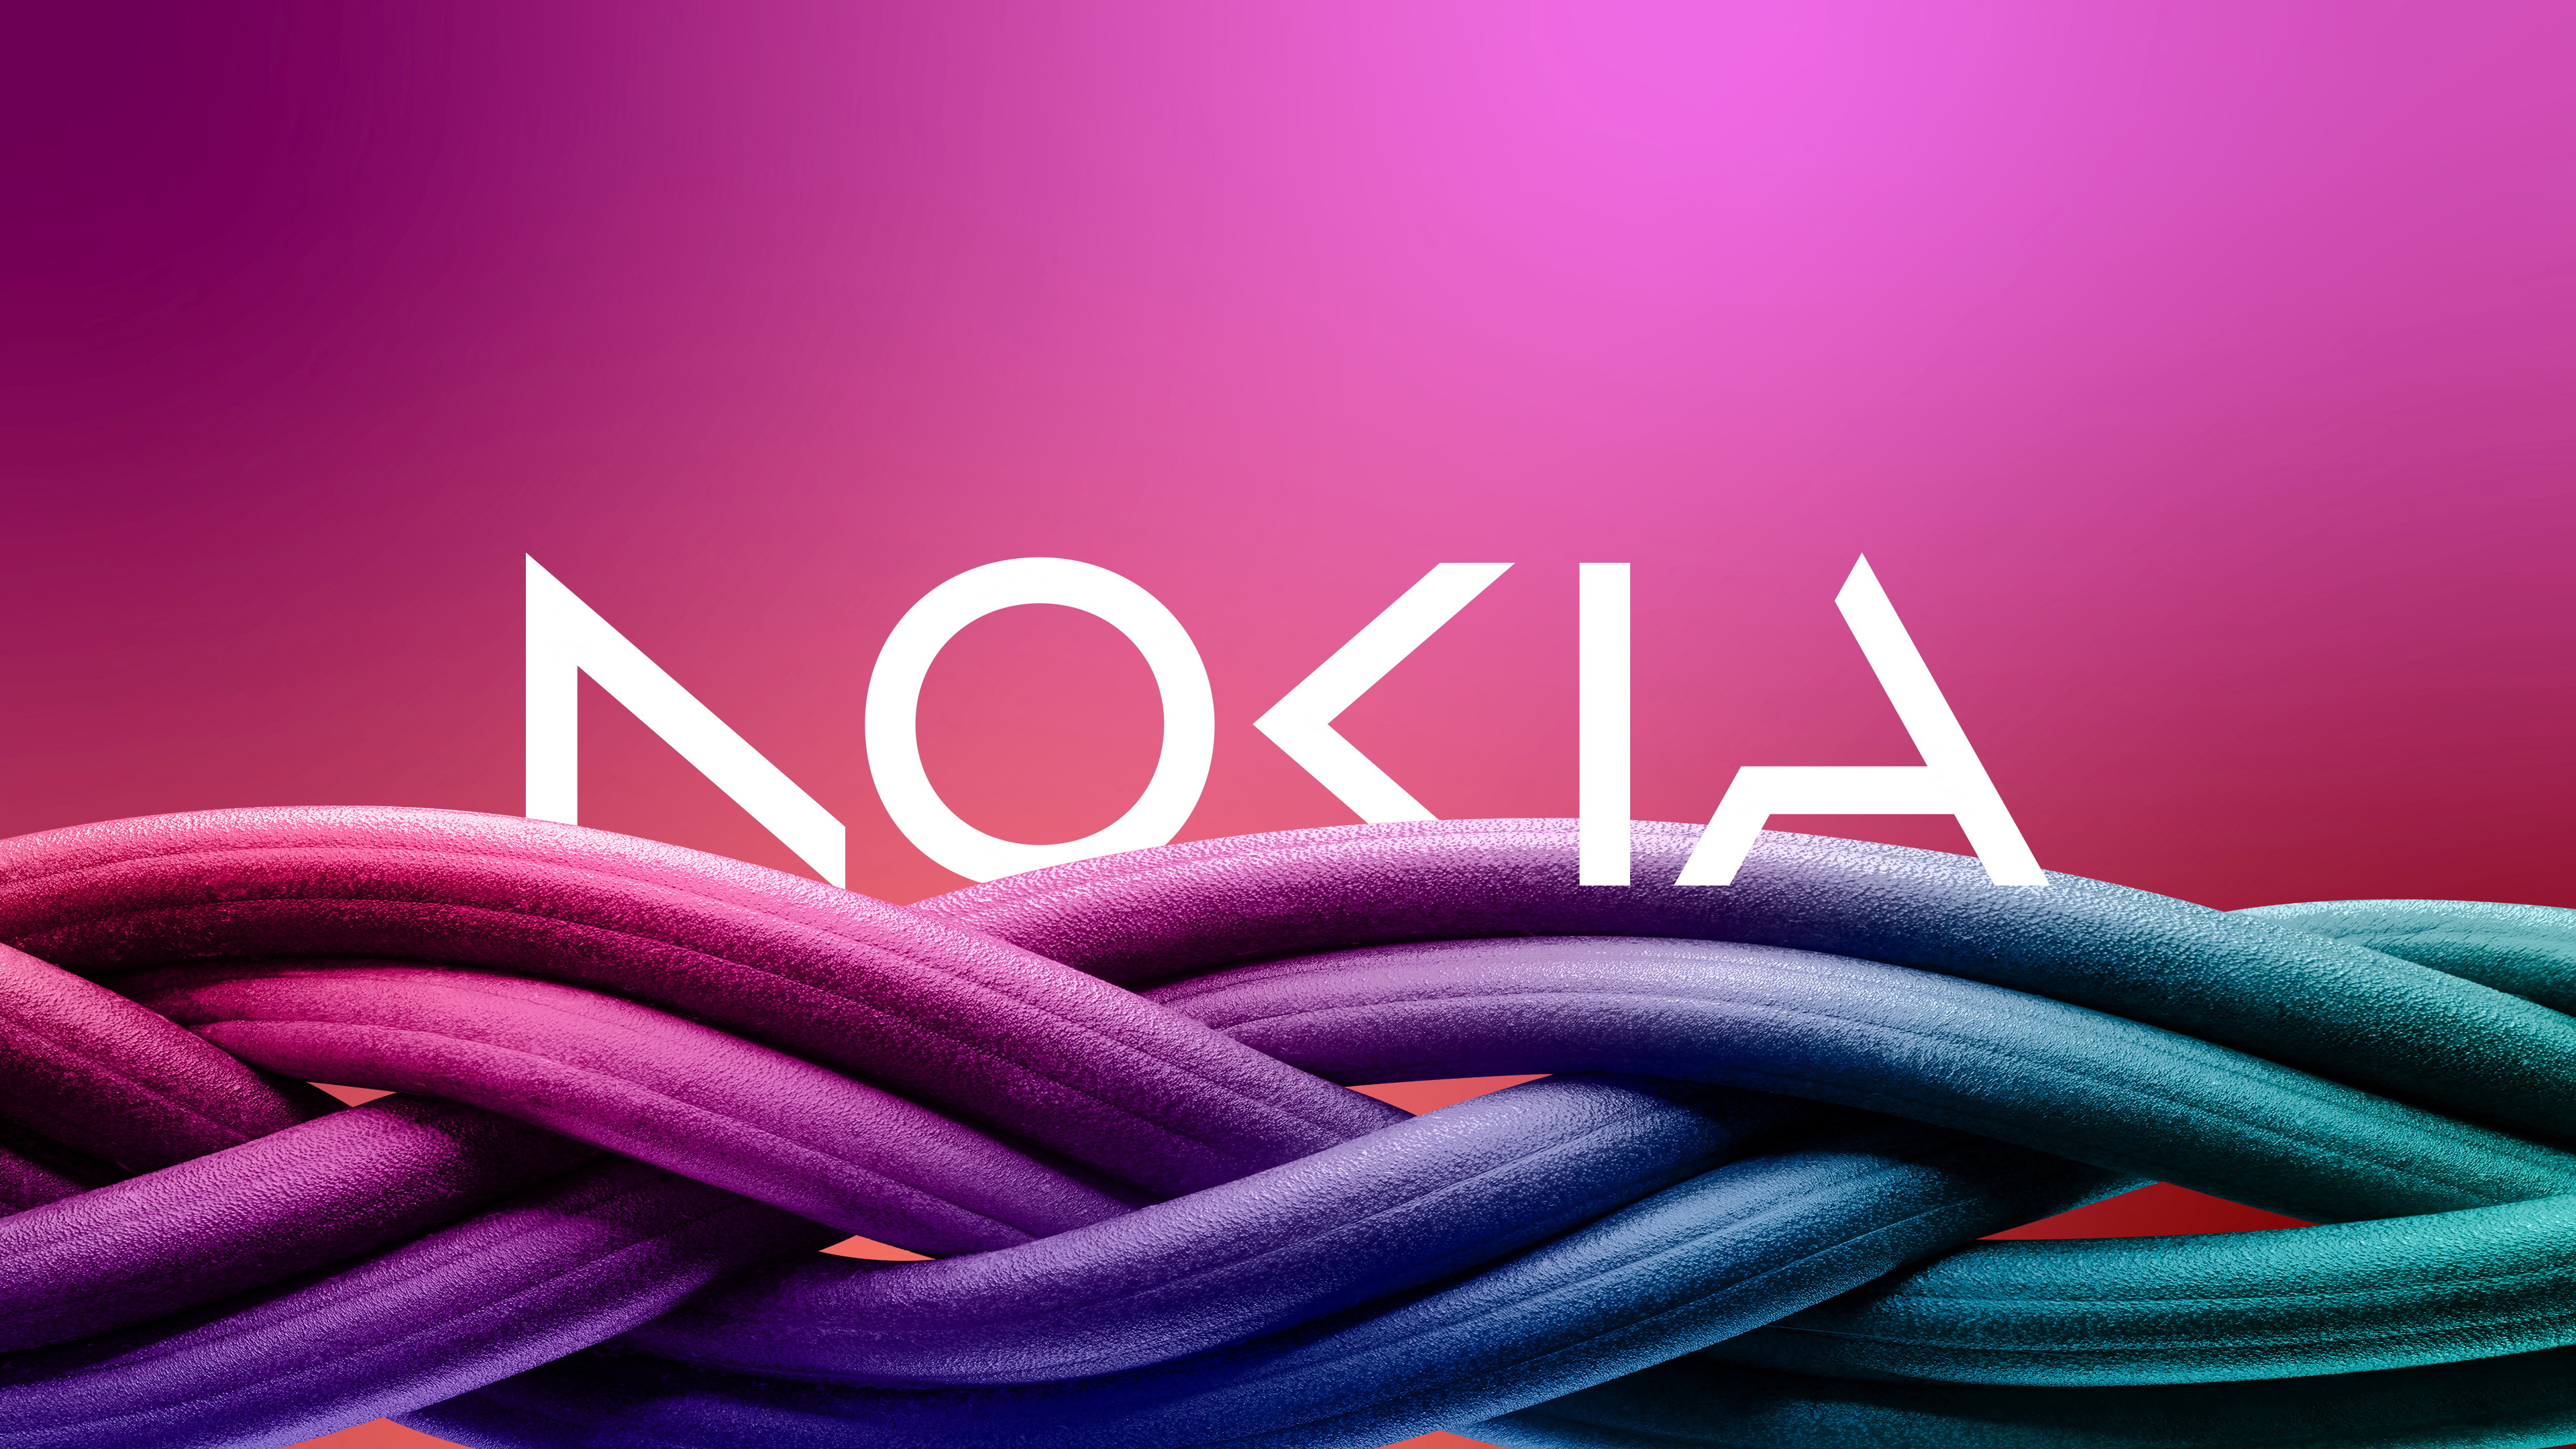 Nokia changes iconic logo to signal strategy shift | Reuters